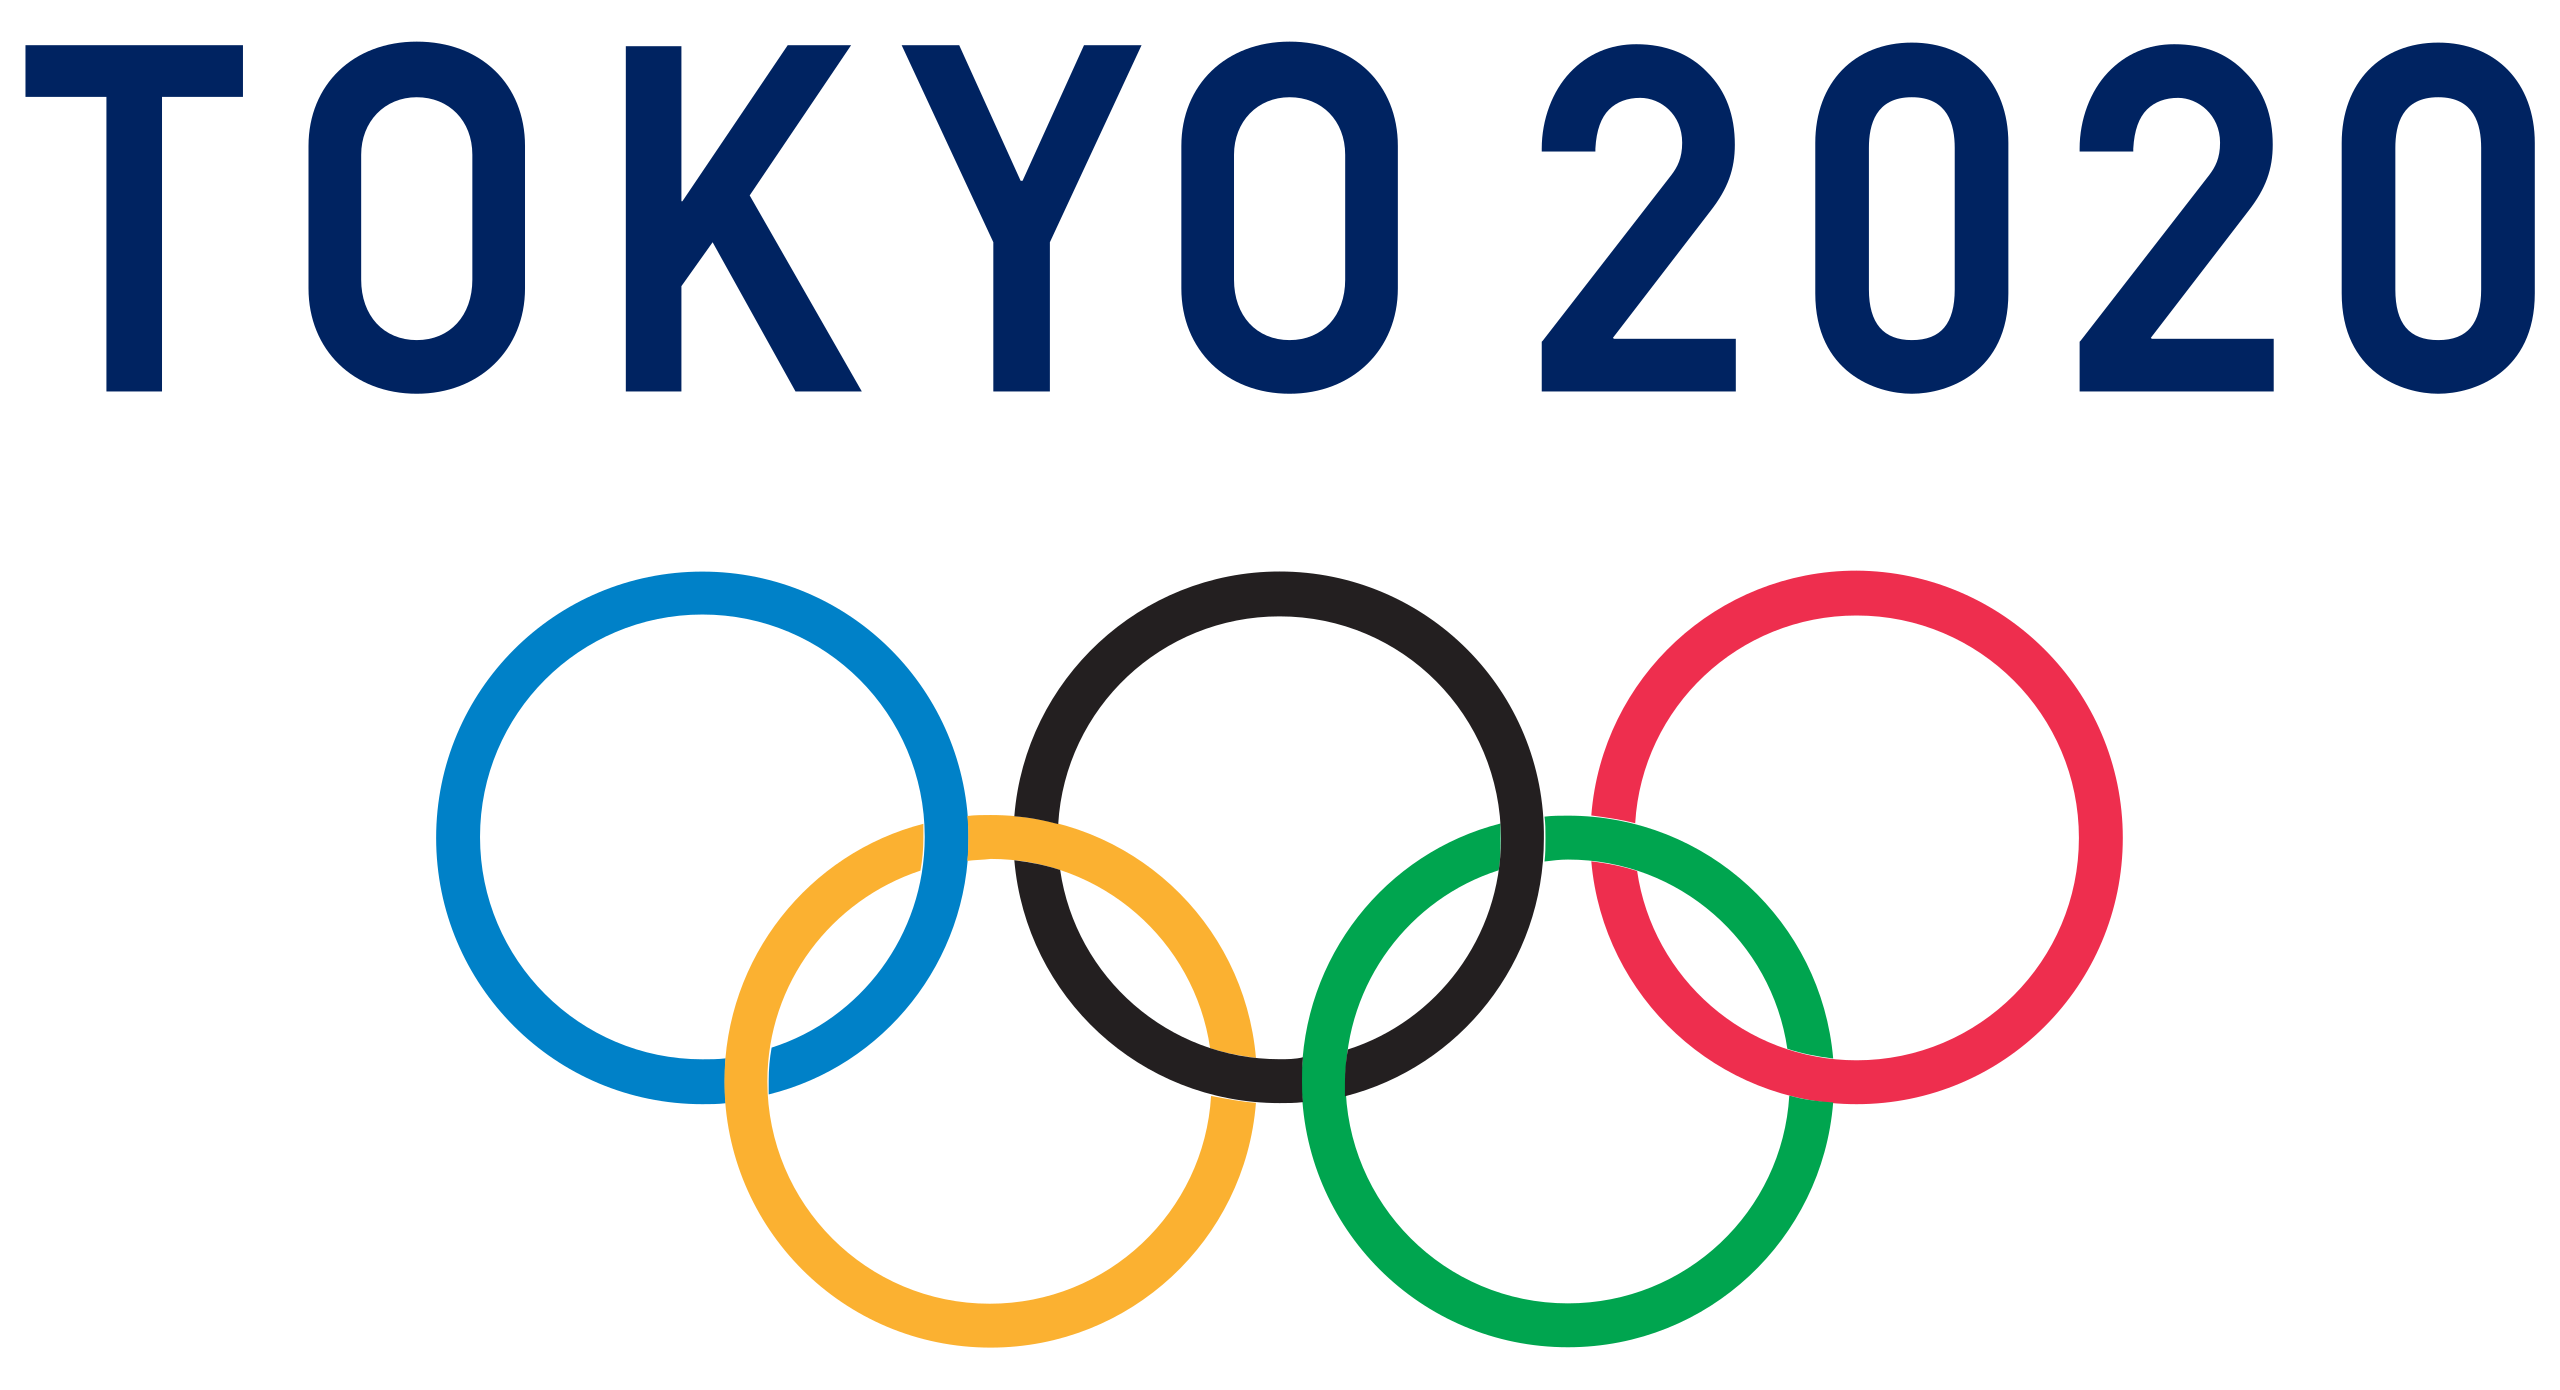 Go Team USA! With the opening ceremony of the 2020 Summer Olympics quickly approaching, which event are you most excited to watch? 